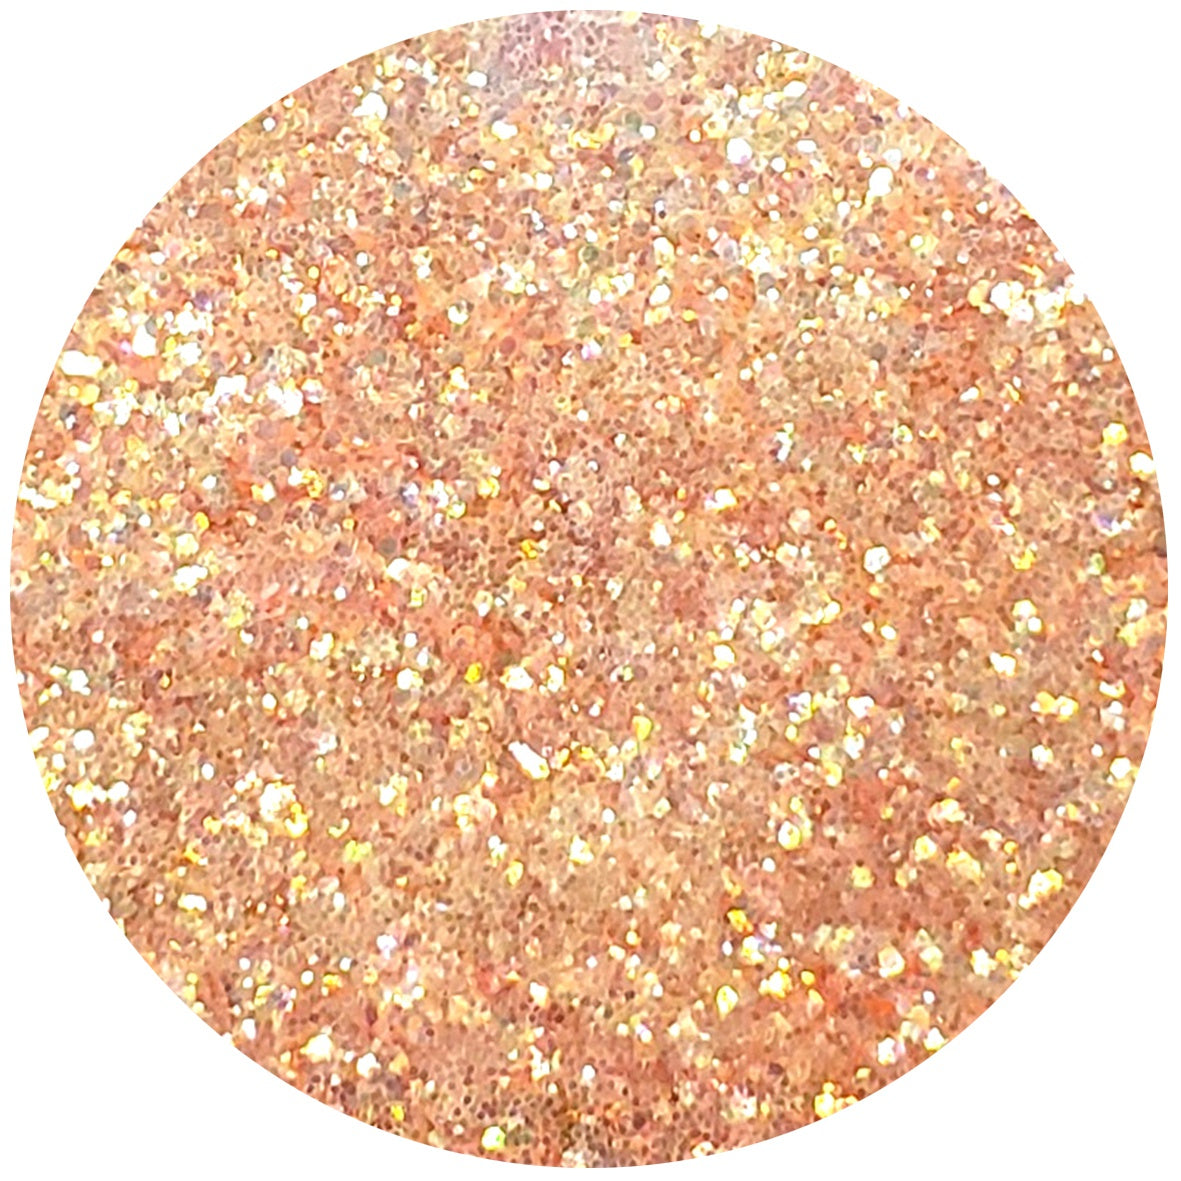 We R Memory Keepers Spin It Glitter Mix 10oz